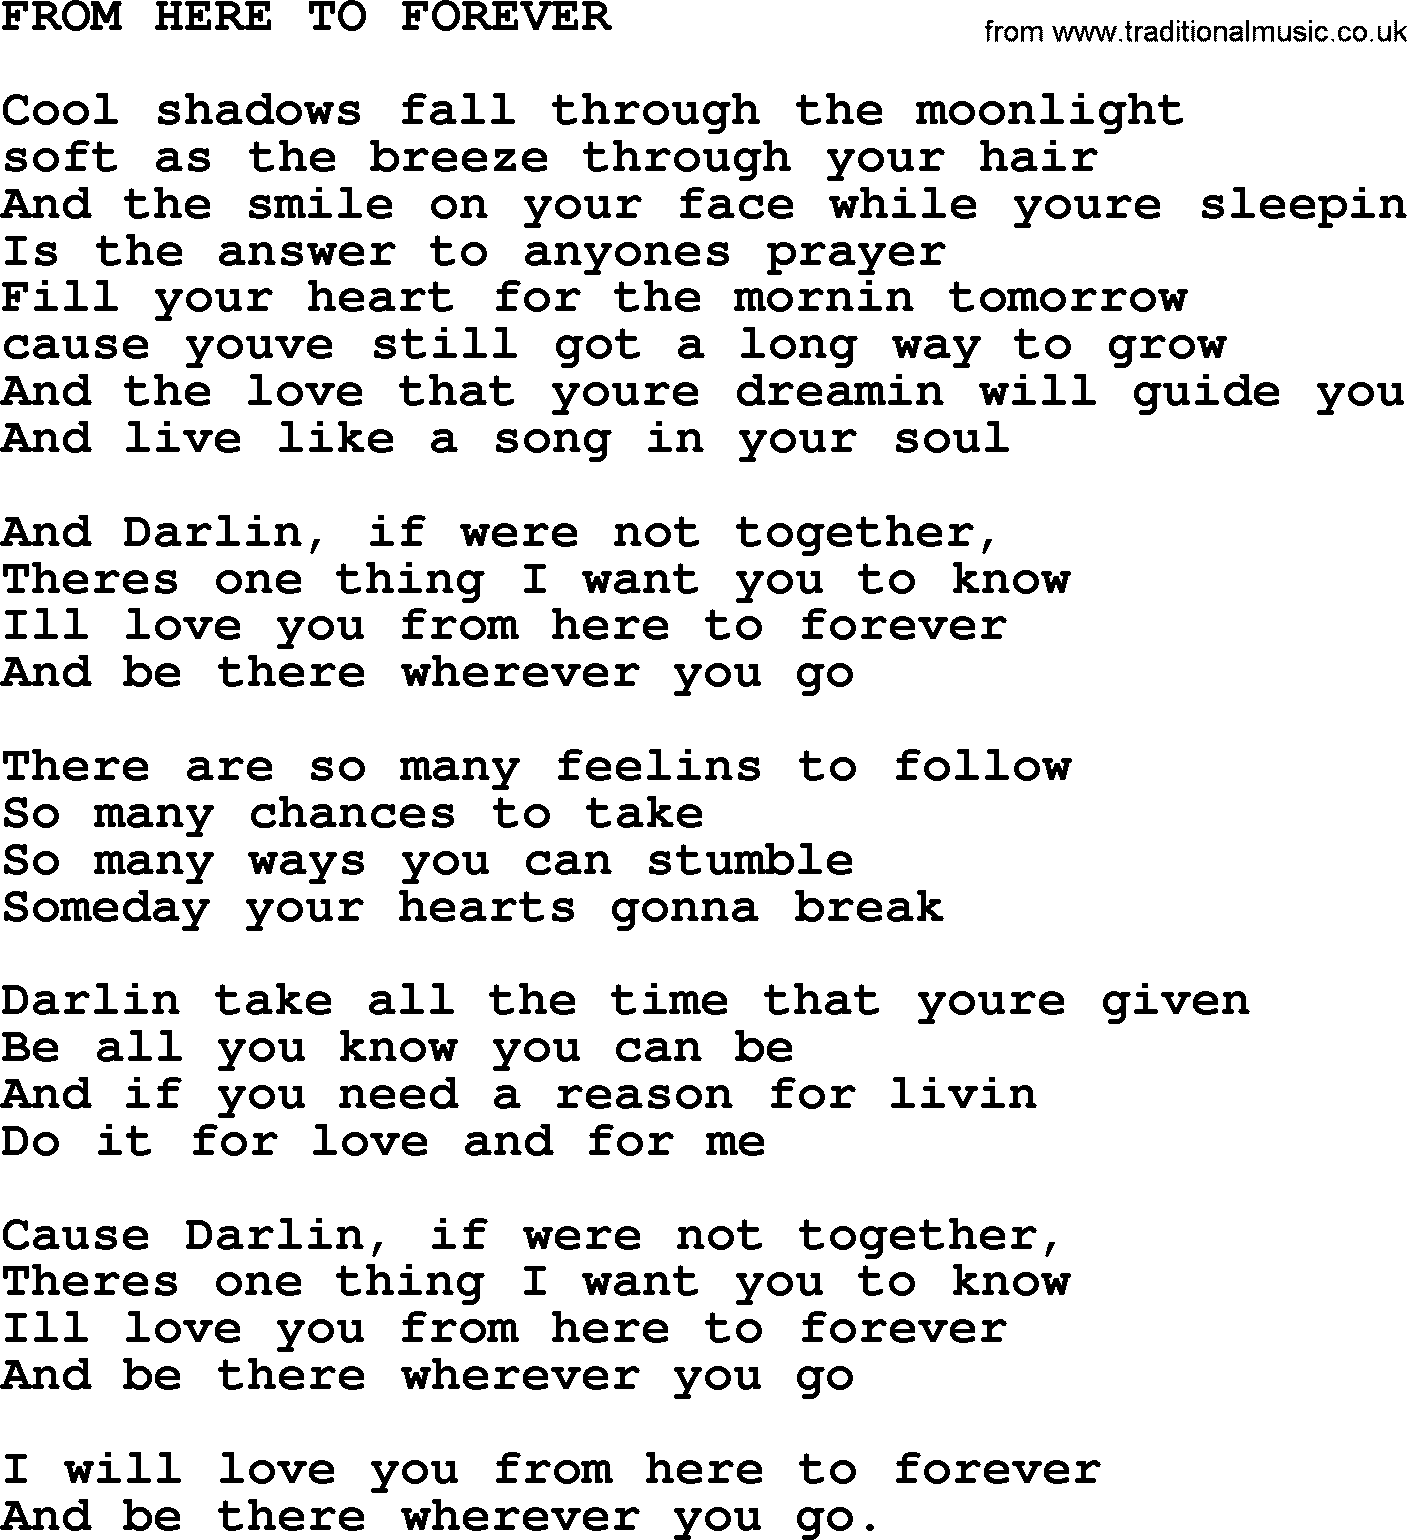 Kris Kristofferson song: From Here To Forever lyrics